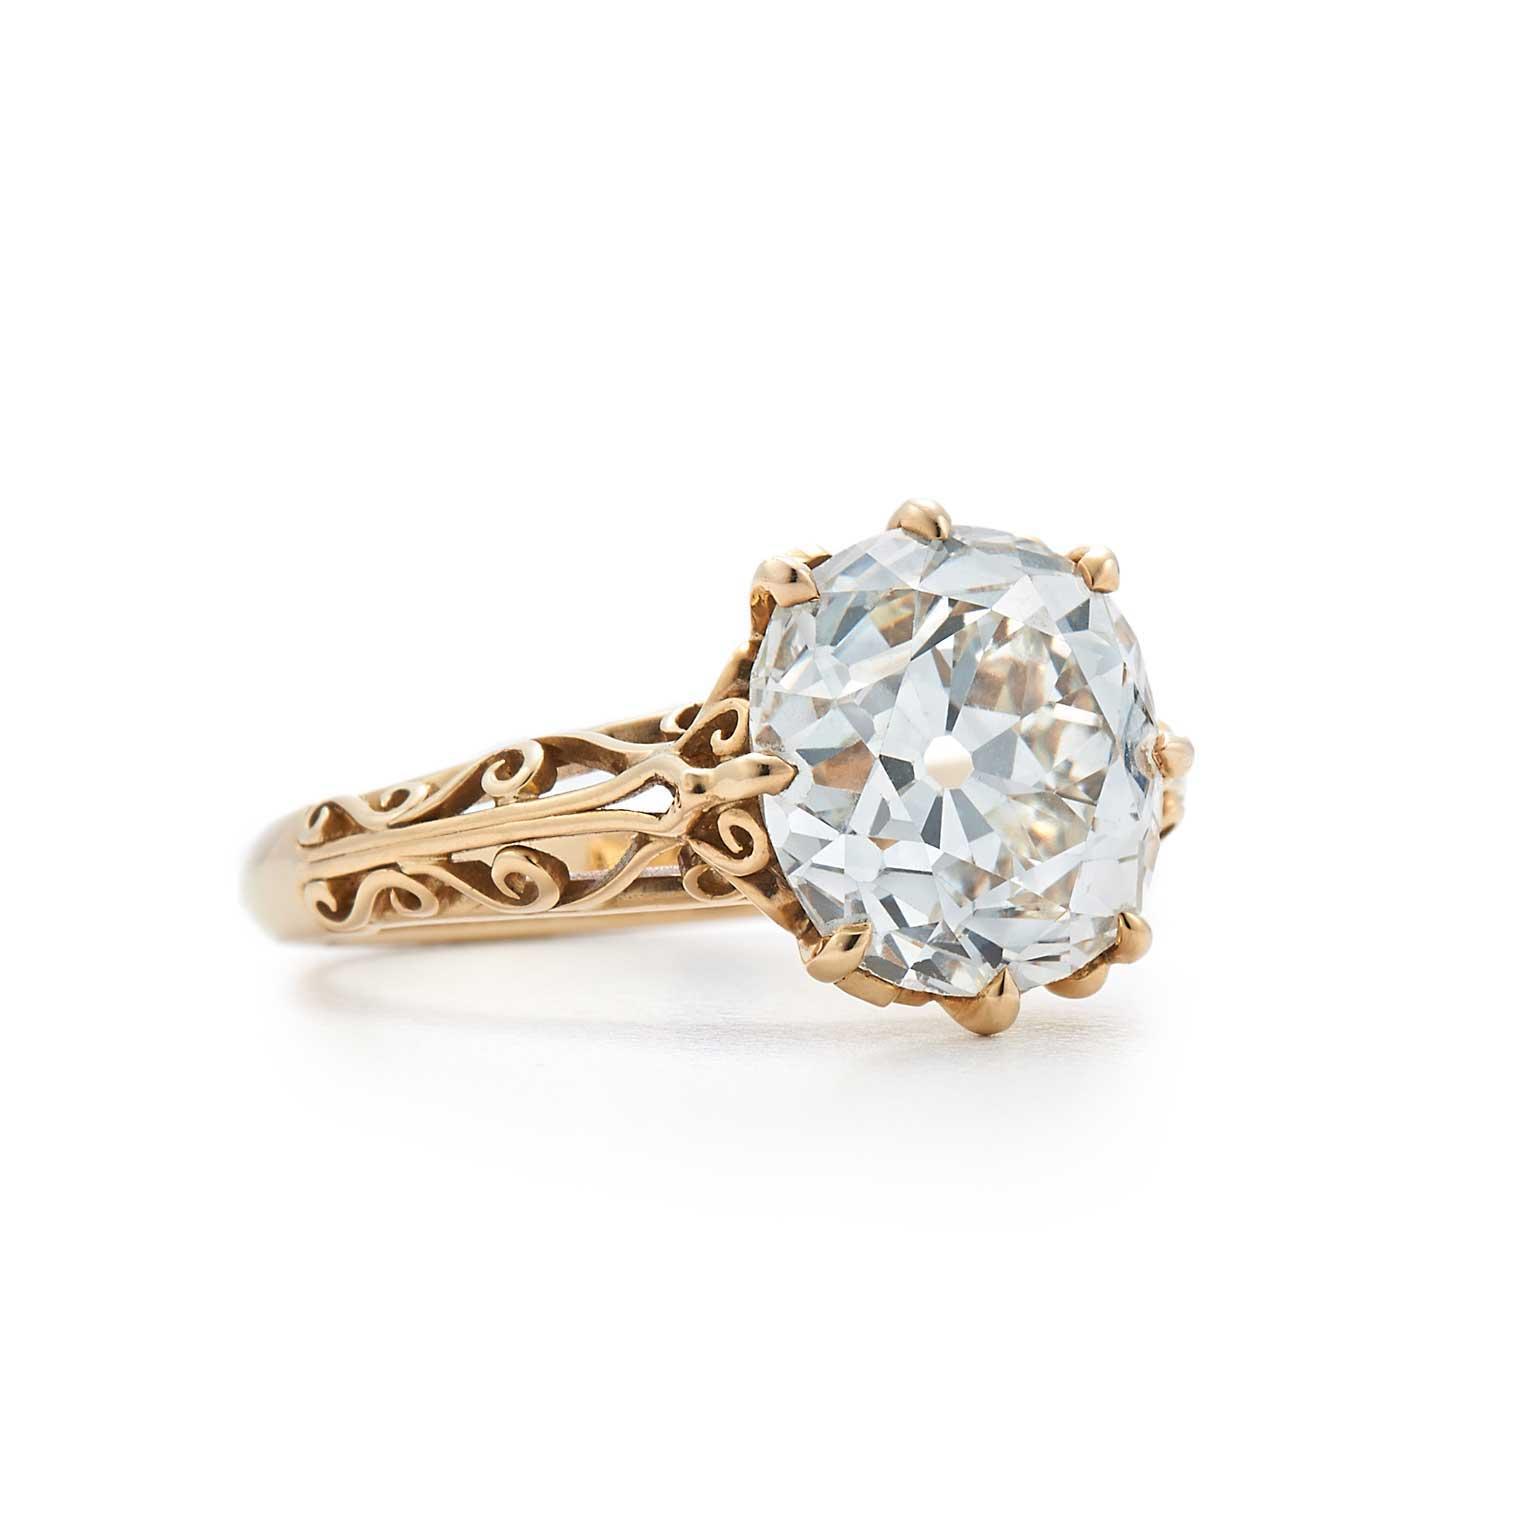 The best engagement rings of 2015